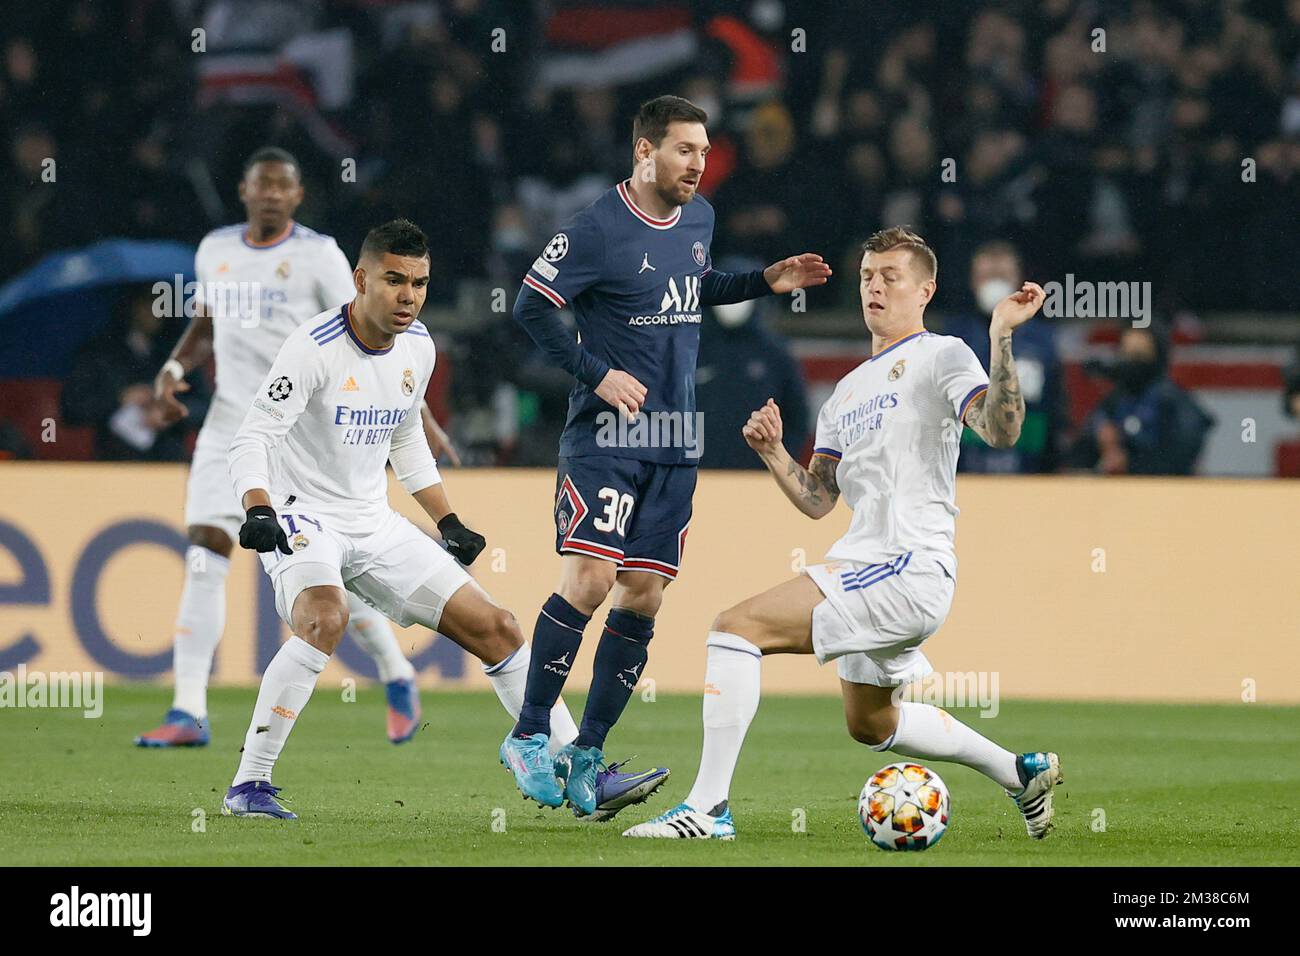 PSG's Lionel Messi and Real's Toni Kroos fight for the ball during a soccer game between French club Paris Saint-Germain and Spanish club Real Madrid, Tuesday 15 February 2022 in Paris, in the round of sisteen (1/8 final) of the UEFA Champions League. BELGA PHOTO BRUNO FAHY Stock Photo